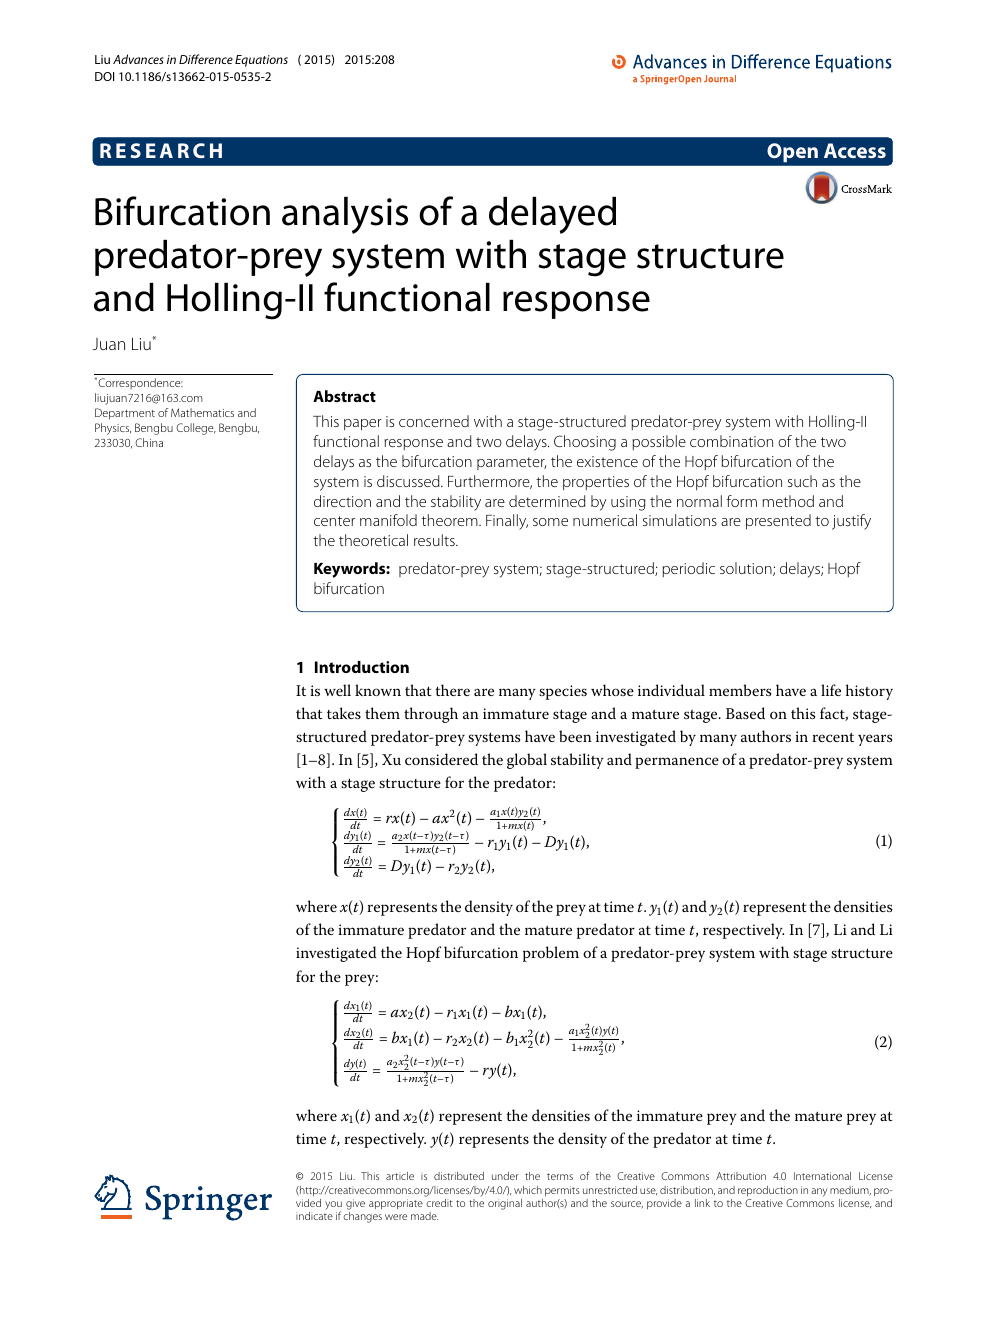 Bifurcation Analysis Of A Delayed Predator Prey System With Stage Structure And Holling Ii Functional Response Topic Of Research Paper In Mathematics Download Scholarly Article Pdf And Read For Free On Cyberleninka Open